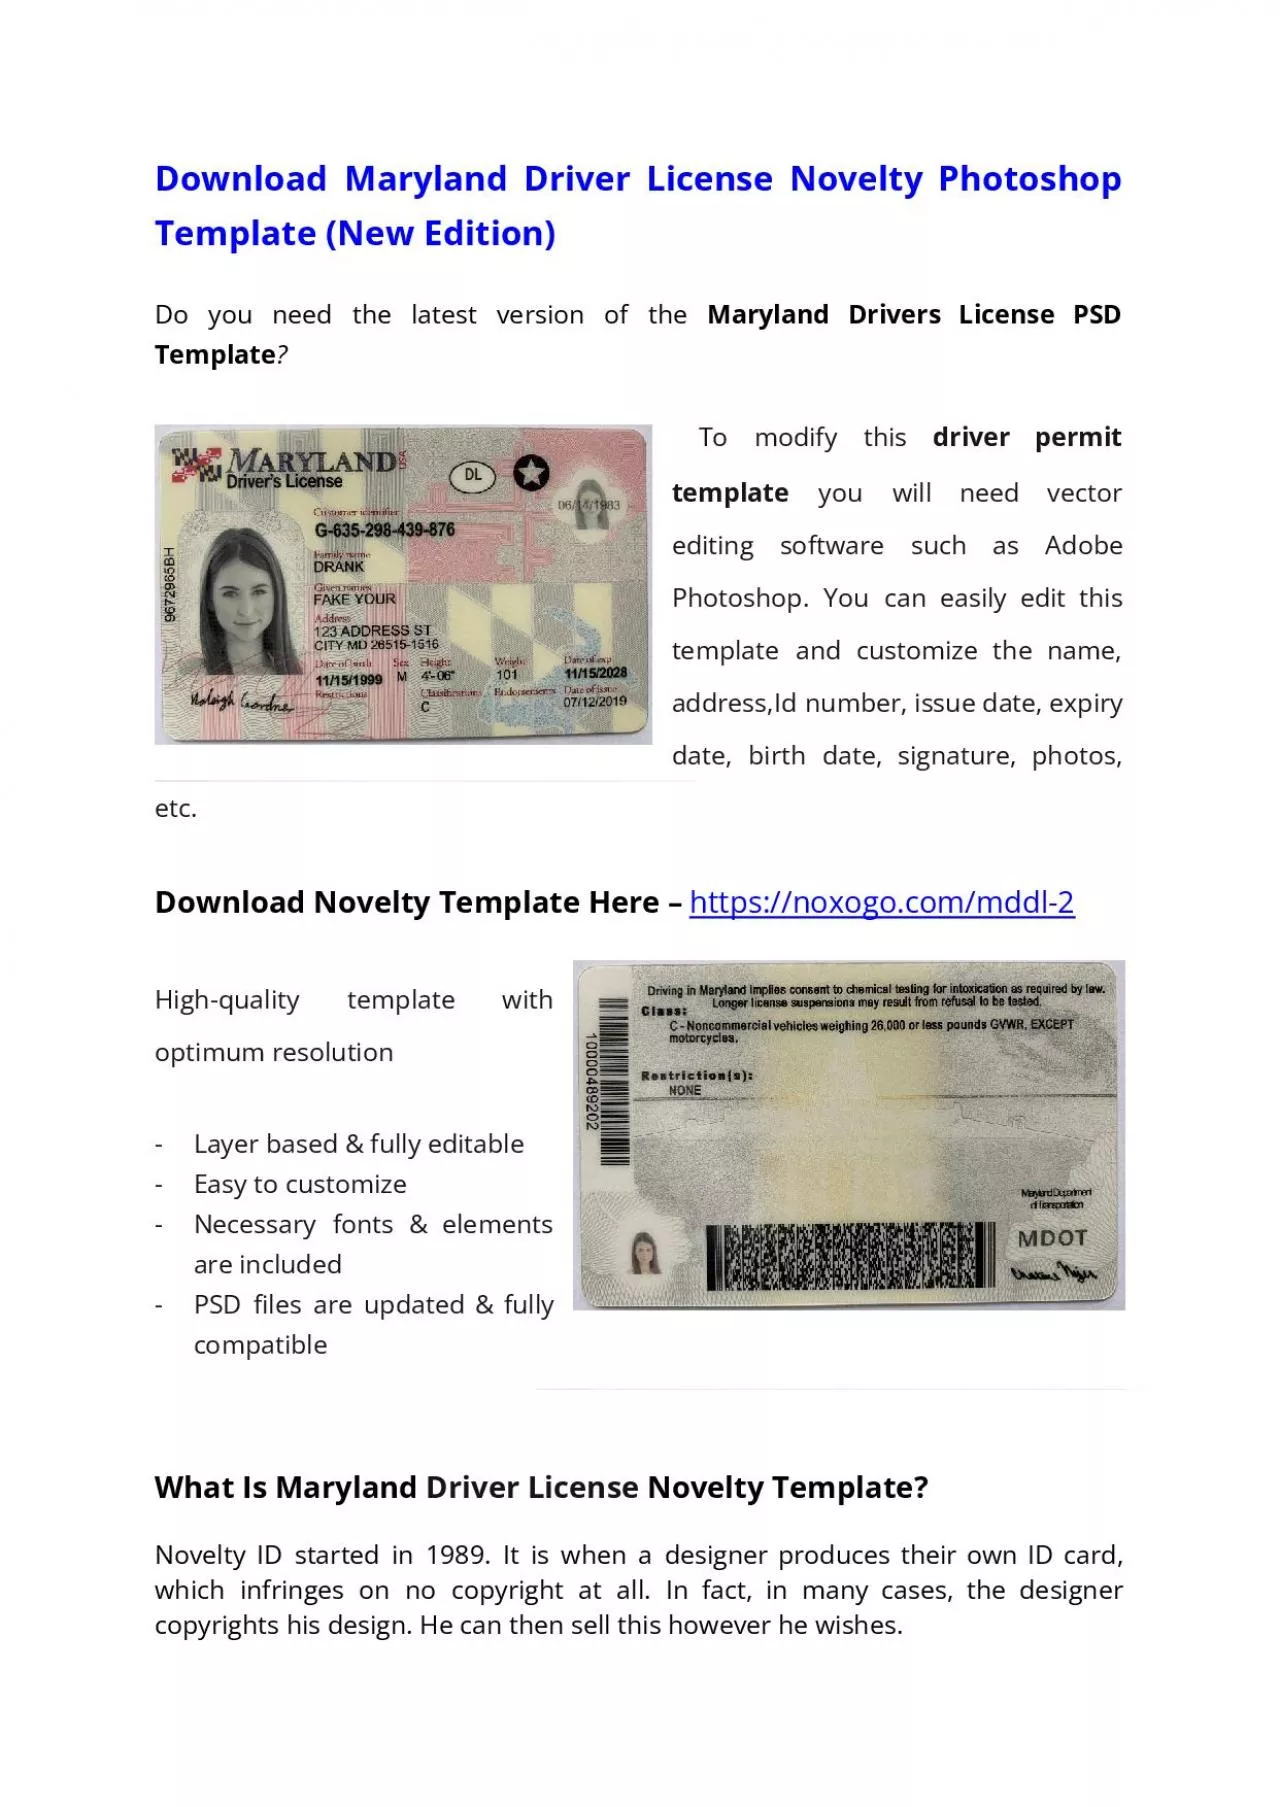 Maryland Drivers License PSD Template (New Edition) – Download Photoshop File